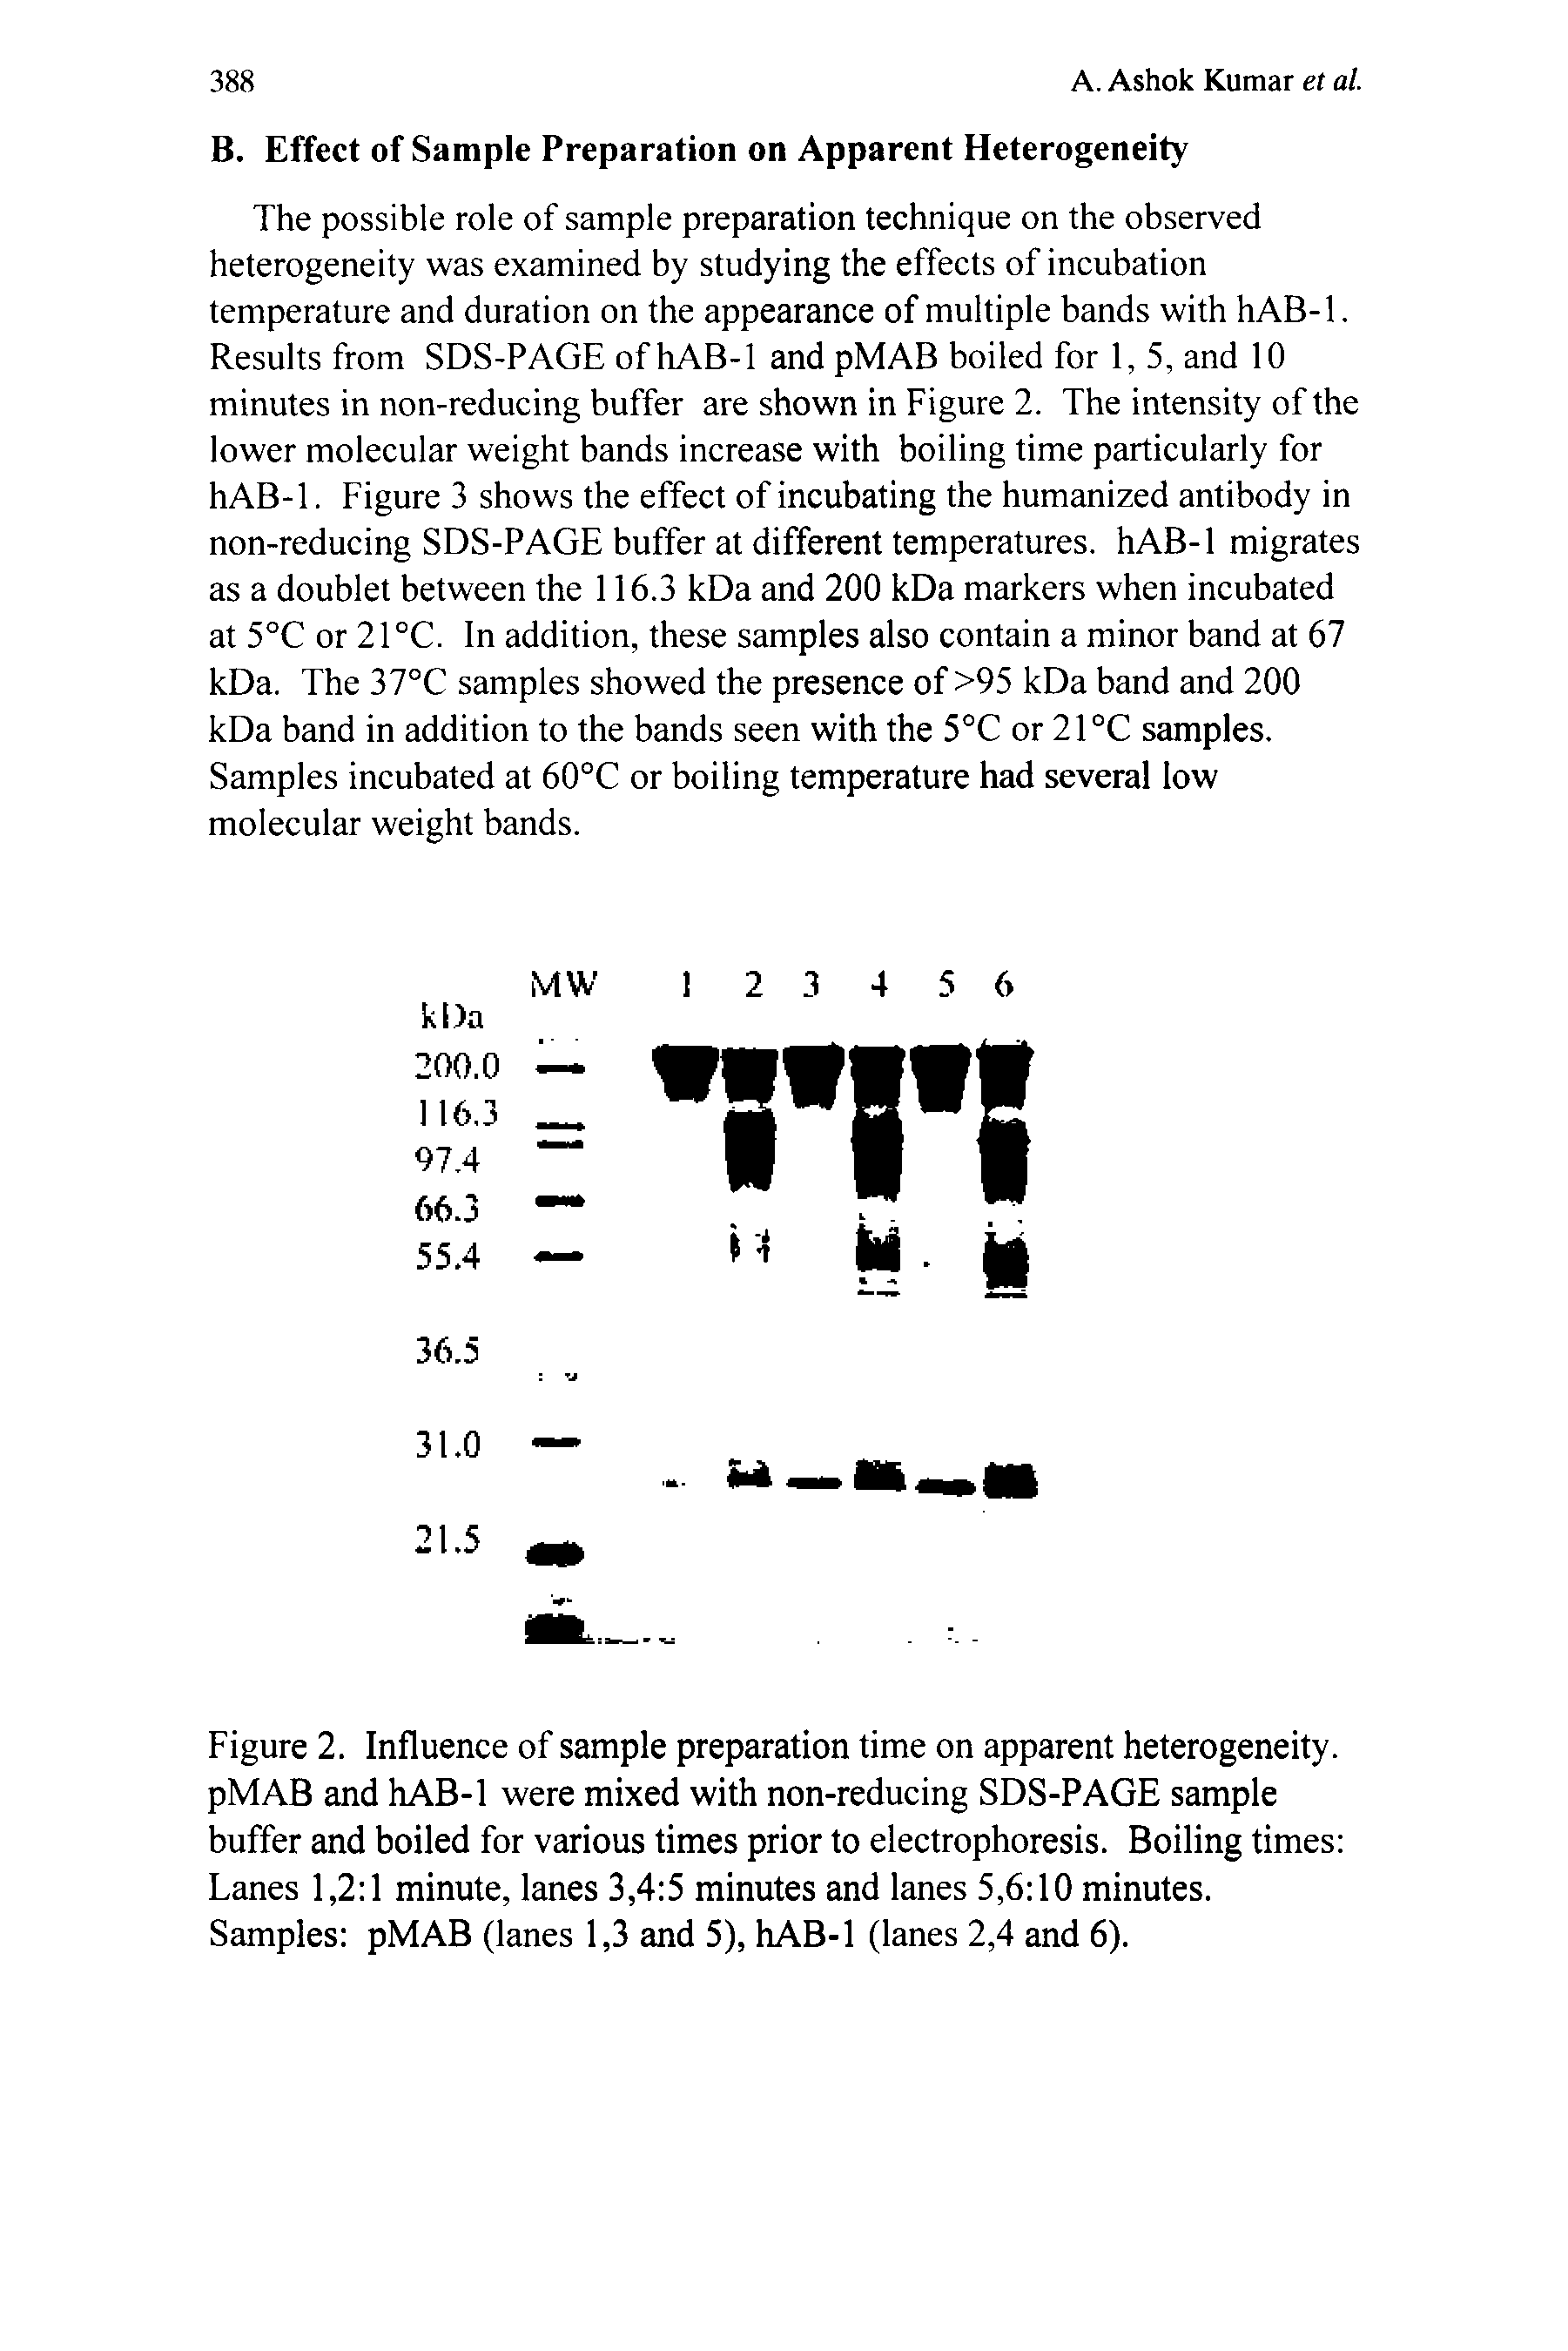 Figure 2. Influence of sample preparation time on apparent heterogeneity. pMAB and hAB-1 were mixed with non-reducing SDS-PAGE sample buffer and boiled for various times prior to electrophoresis. Boiling times Lanes 1,2 1 minute, lanes 3,4 5 minutes and lanes 5,6 10 minutes. Samples pMAB (lanes 1,3 and 5), hAB-1 (lanes 2,4 and 6).